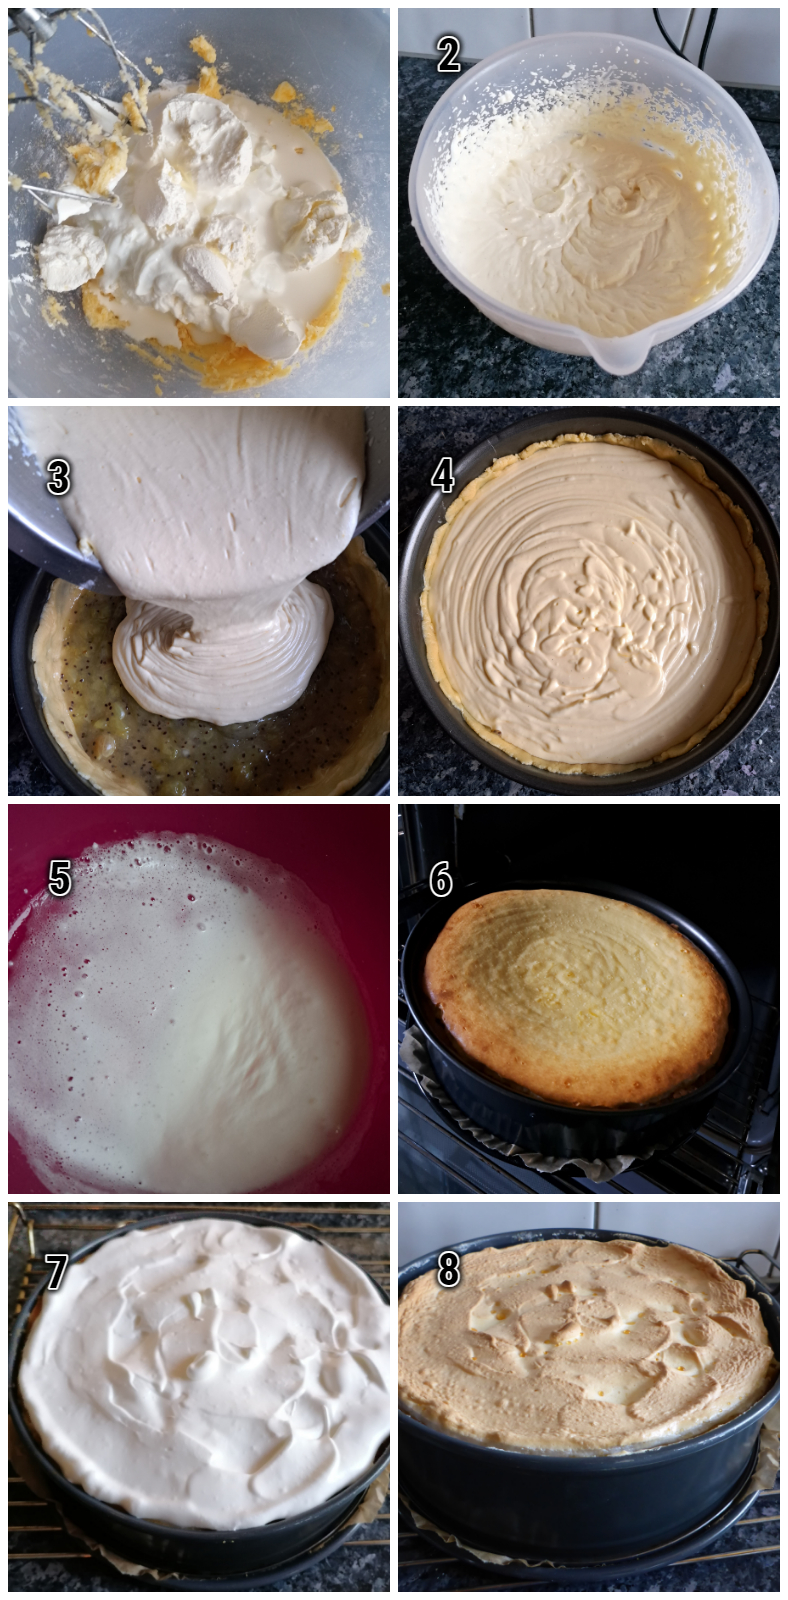 How to make German cheesecake filling with quark for gooseberry cheesecake, fill the cake, bake and top with meringue topping. 